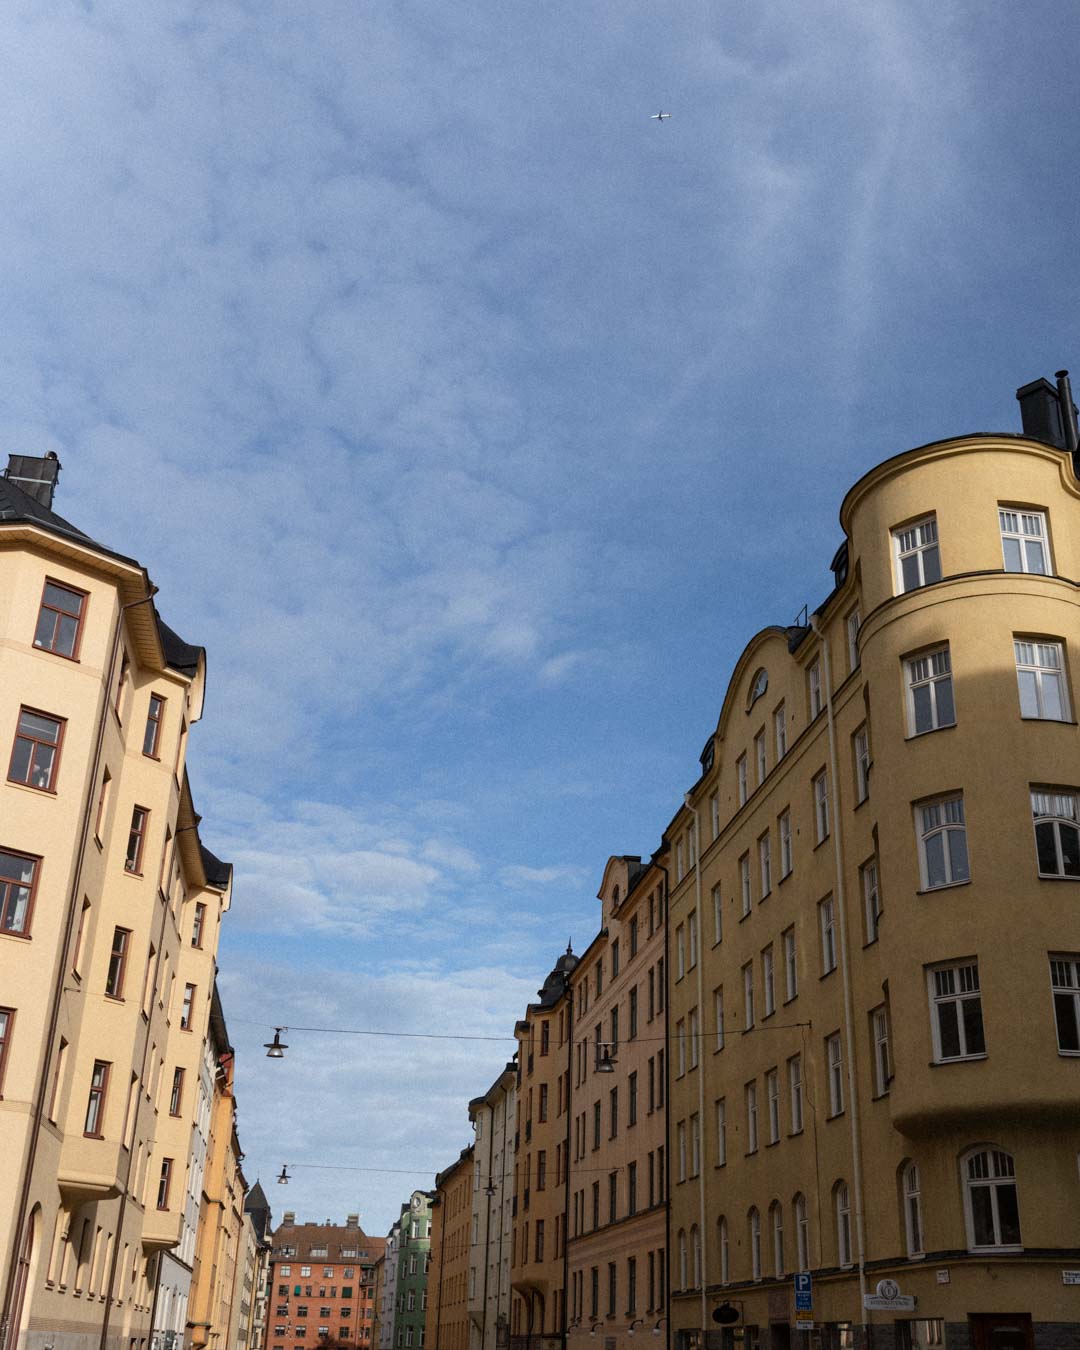 Street image of a suburban street in Stockholm.